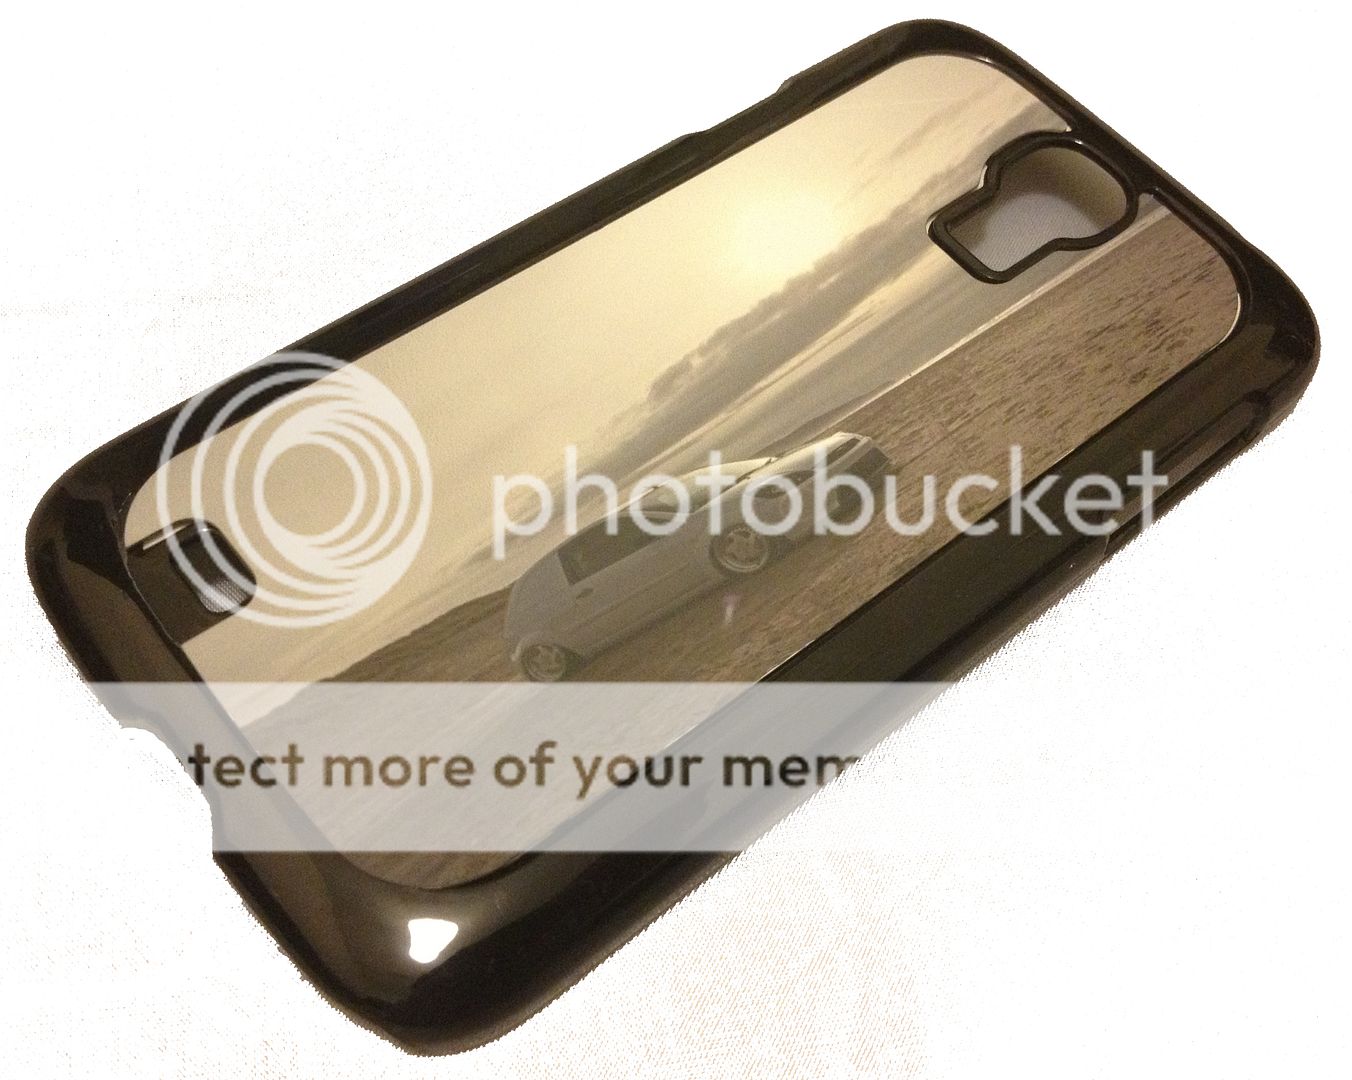 Personalised Photo Case Samsung Galaxy S2 S3 S4 Note 2 Cover 3D Custom Printed